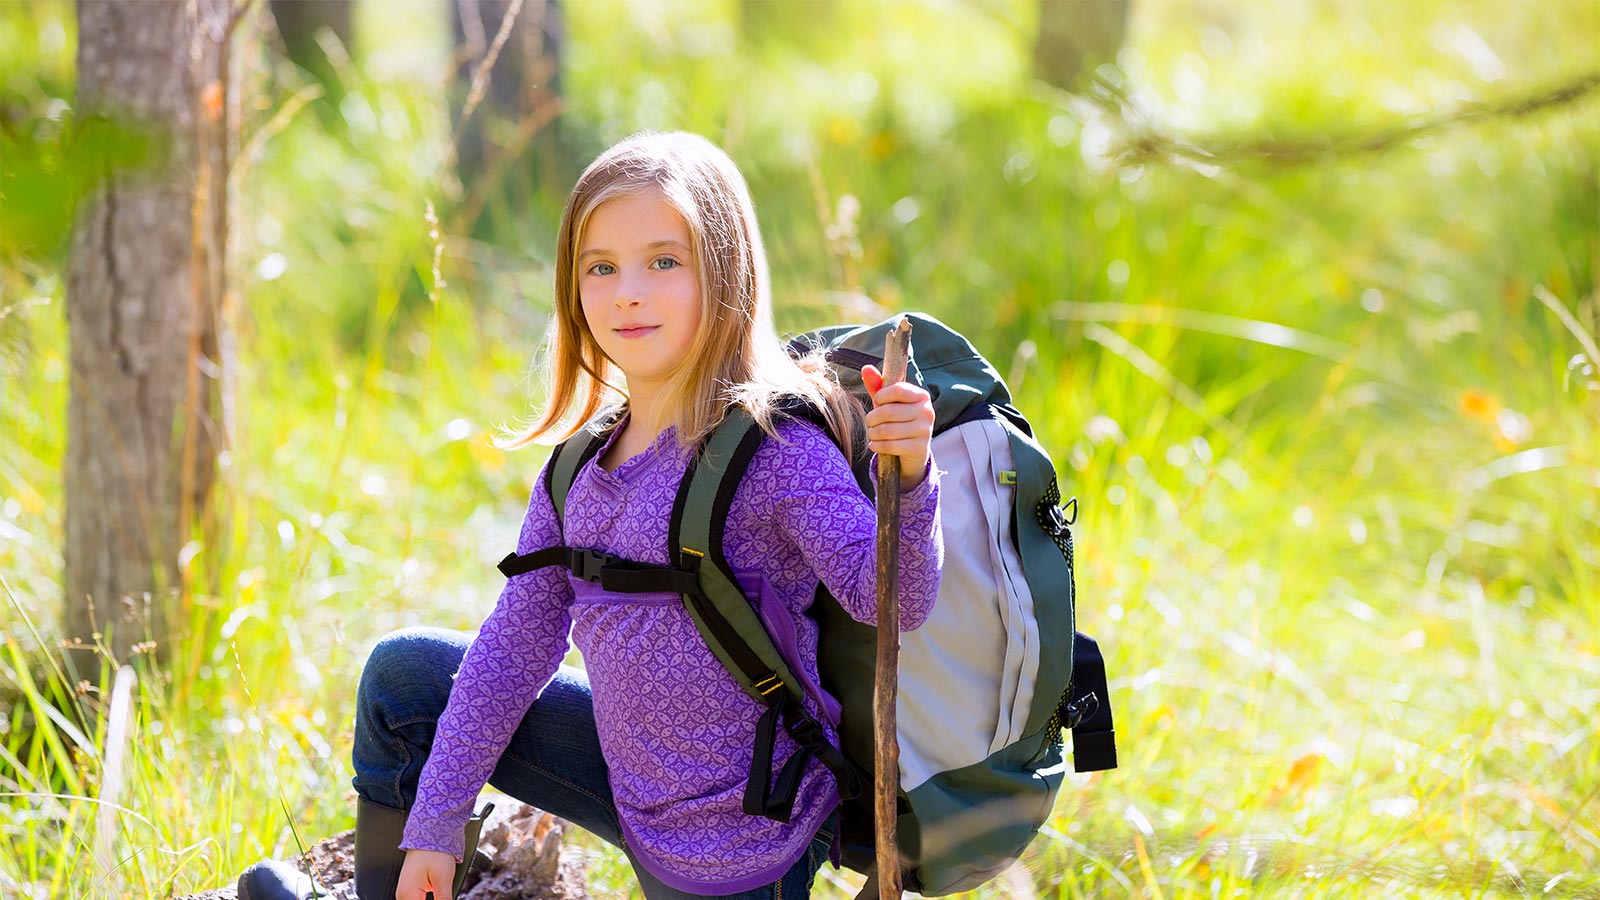 a young girl is posing for a photograph during a hike